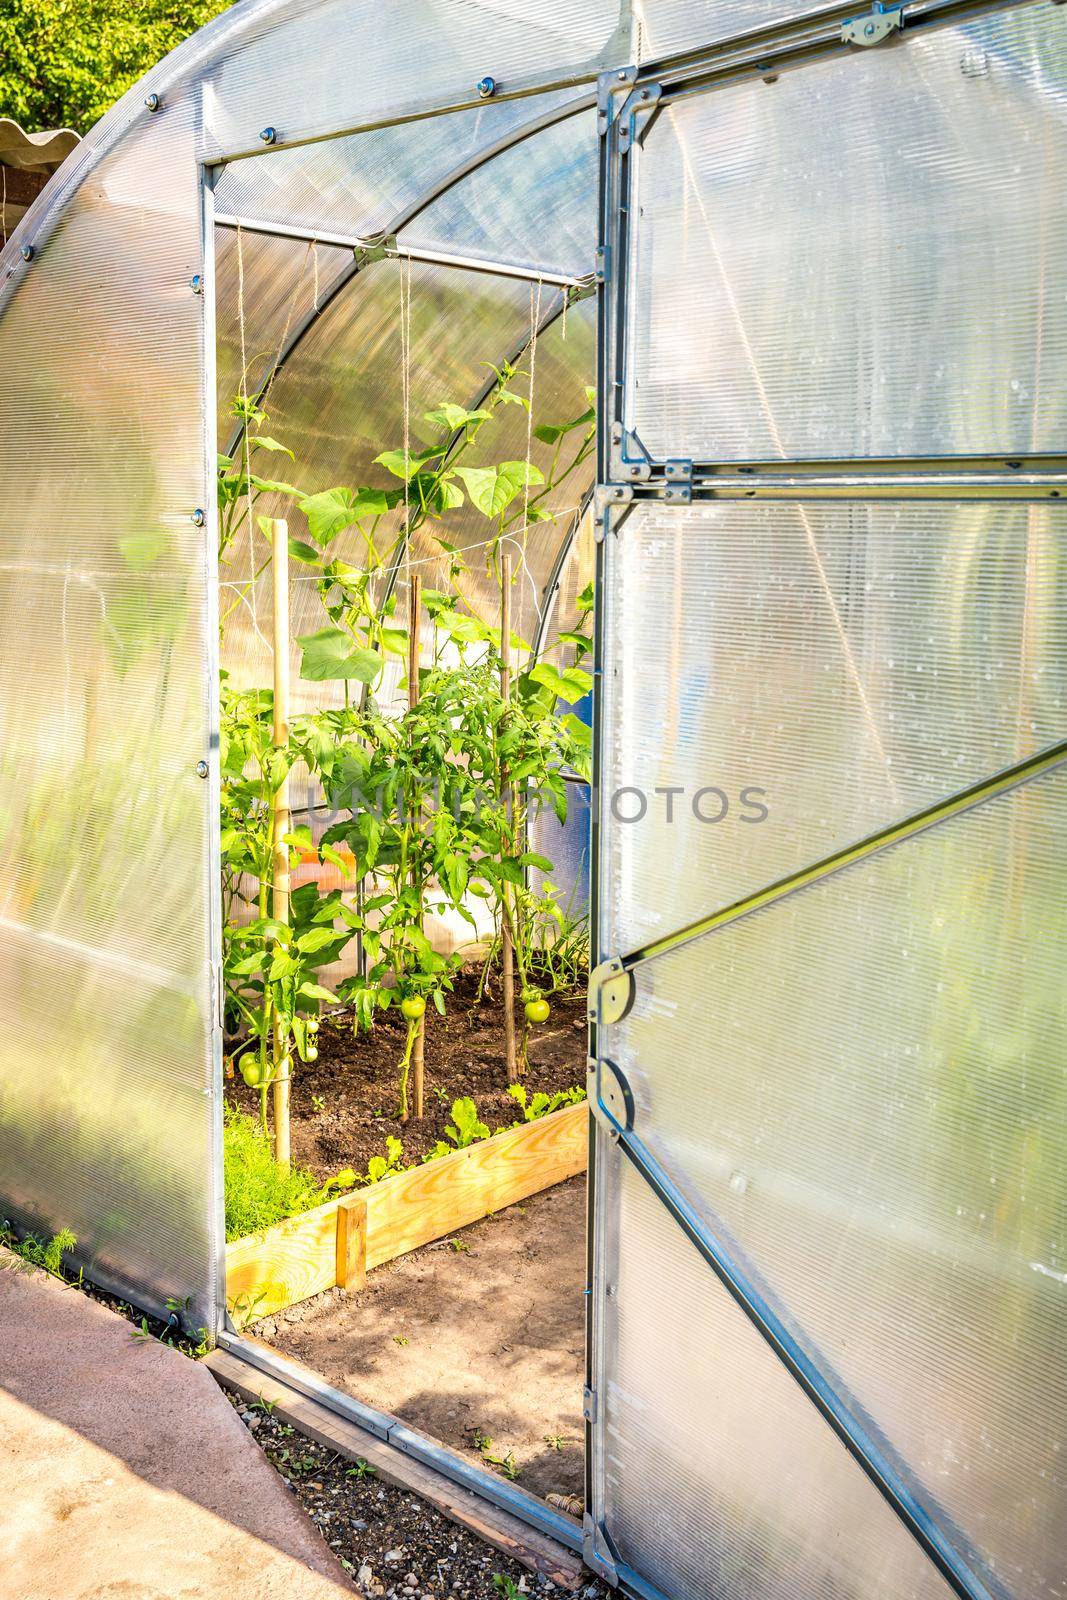 Small greenhouse with tomatoes in private house garden. Inside view